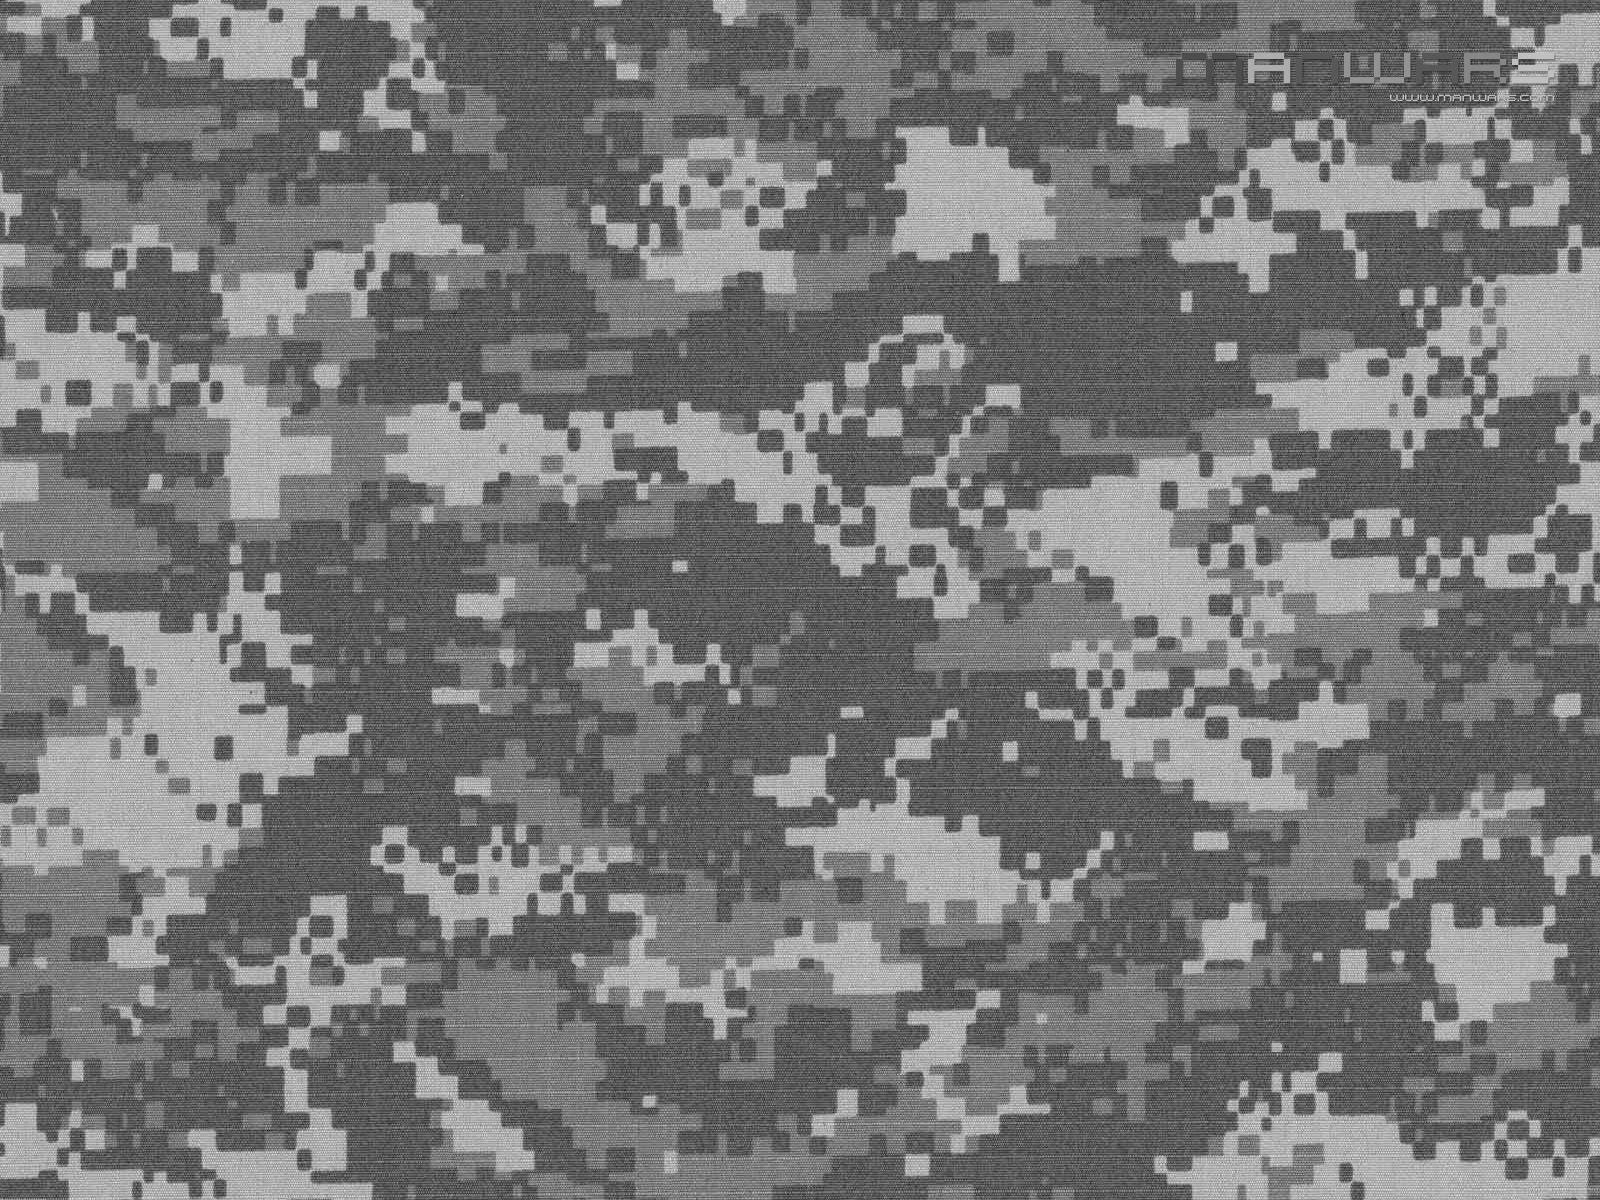 camouflage wallpaper 2015